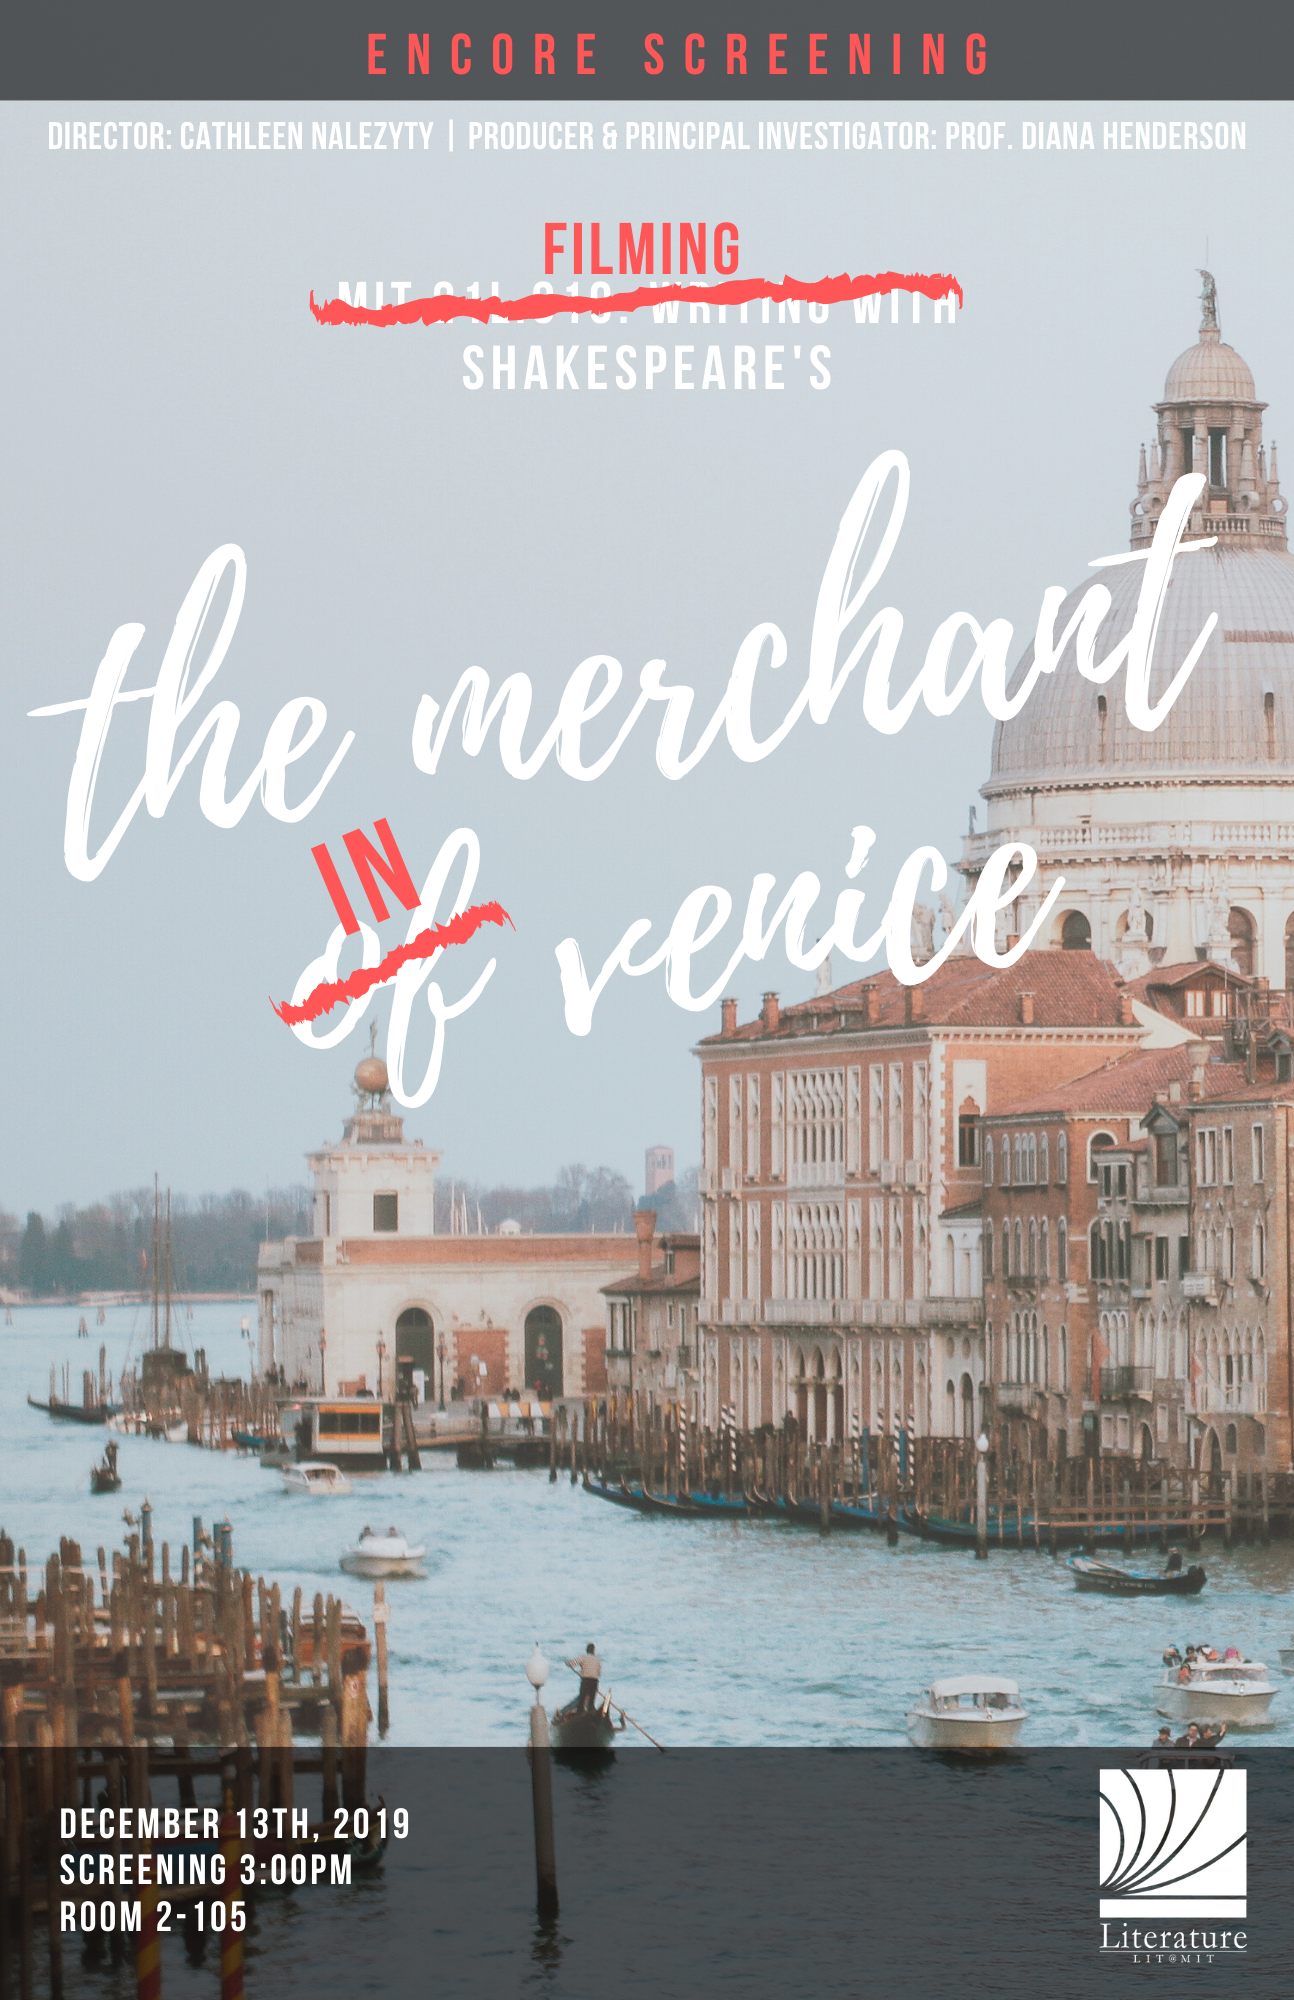 12/13 Encore Screening of “Filming with Shakespeare’s The Merchant in Venice”